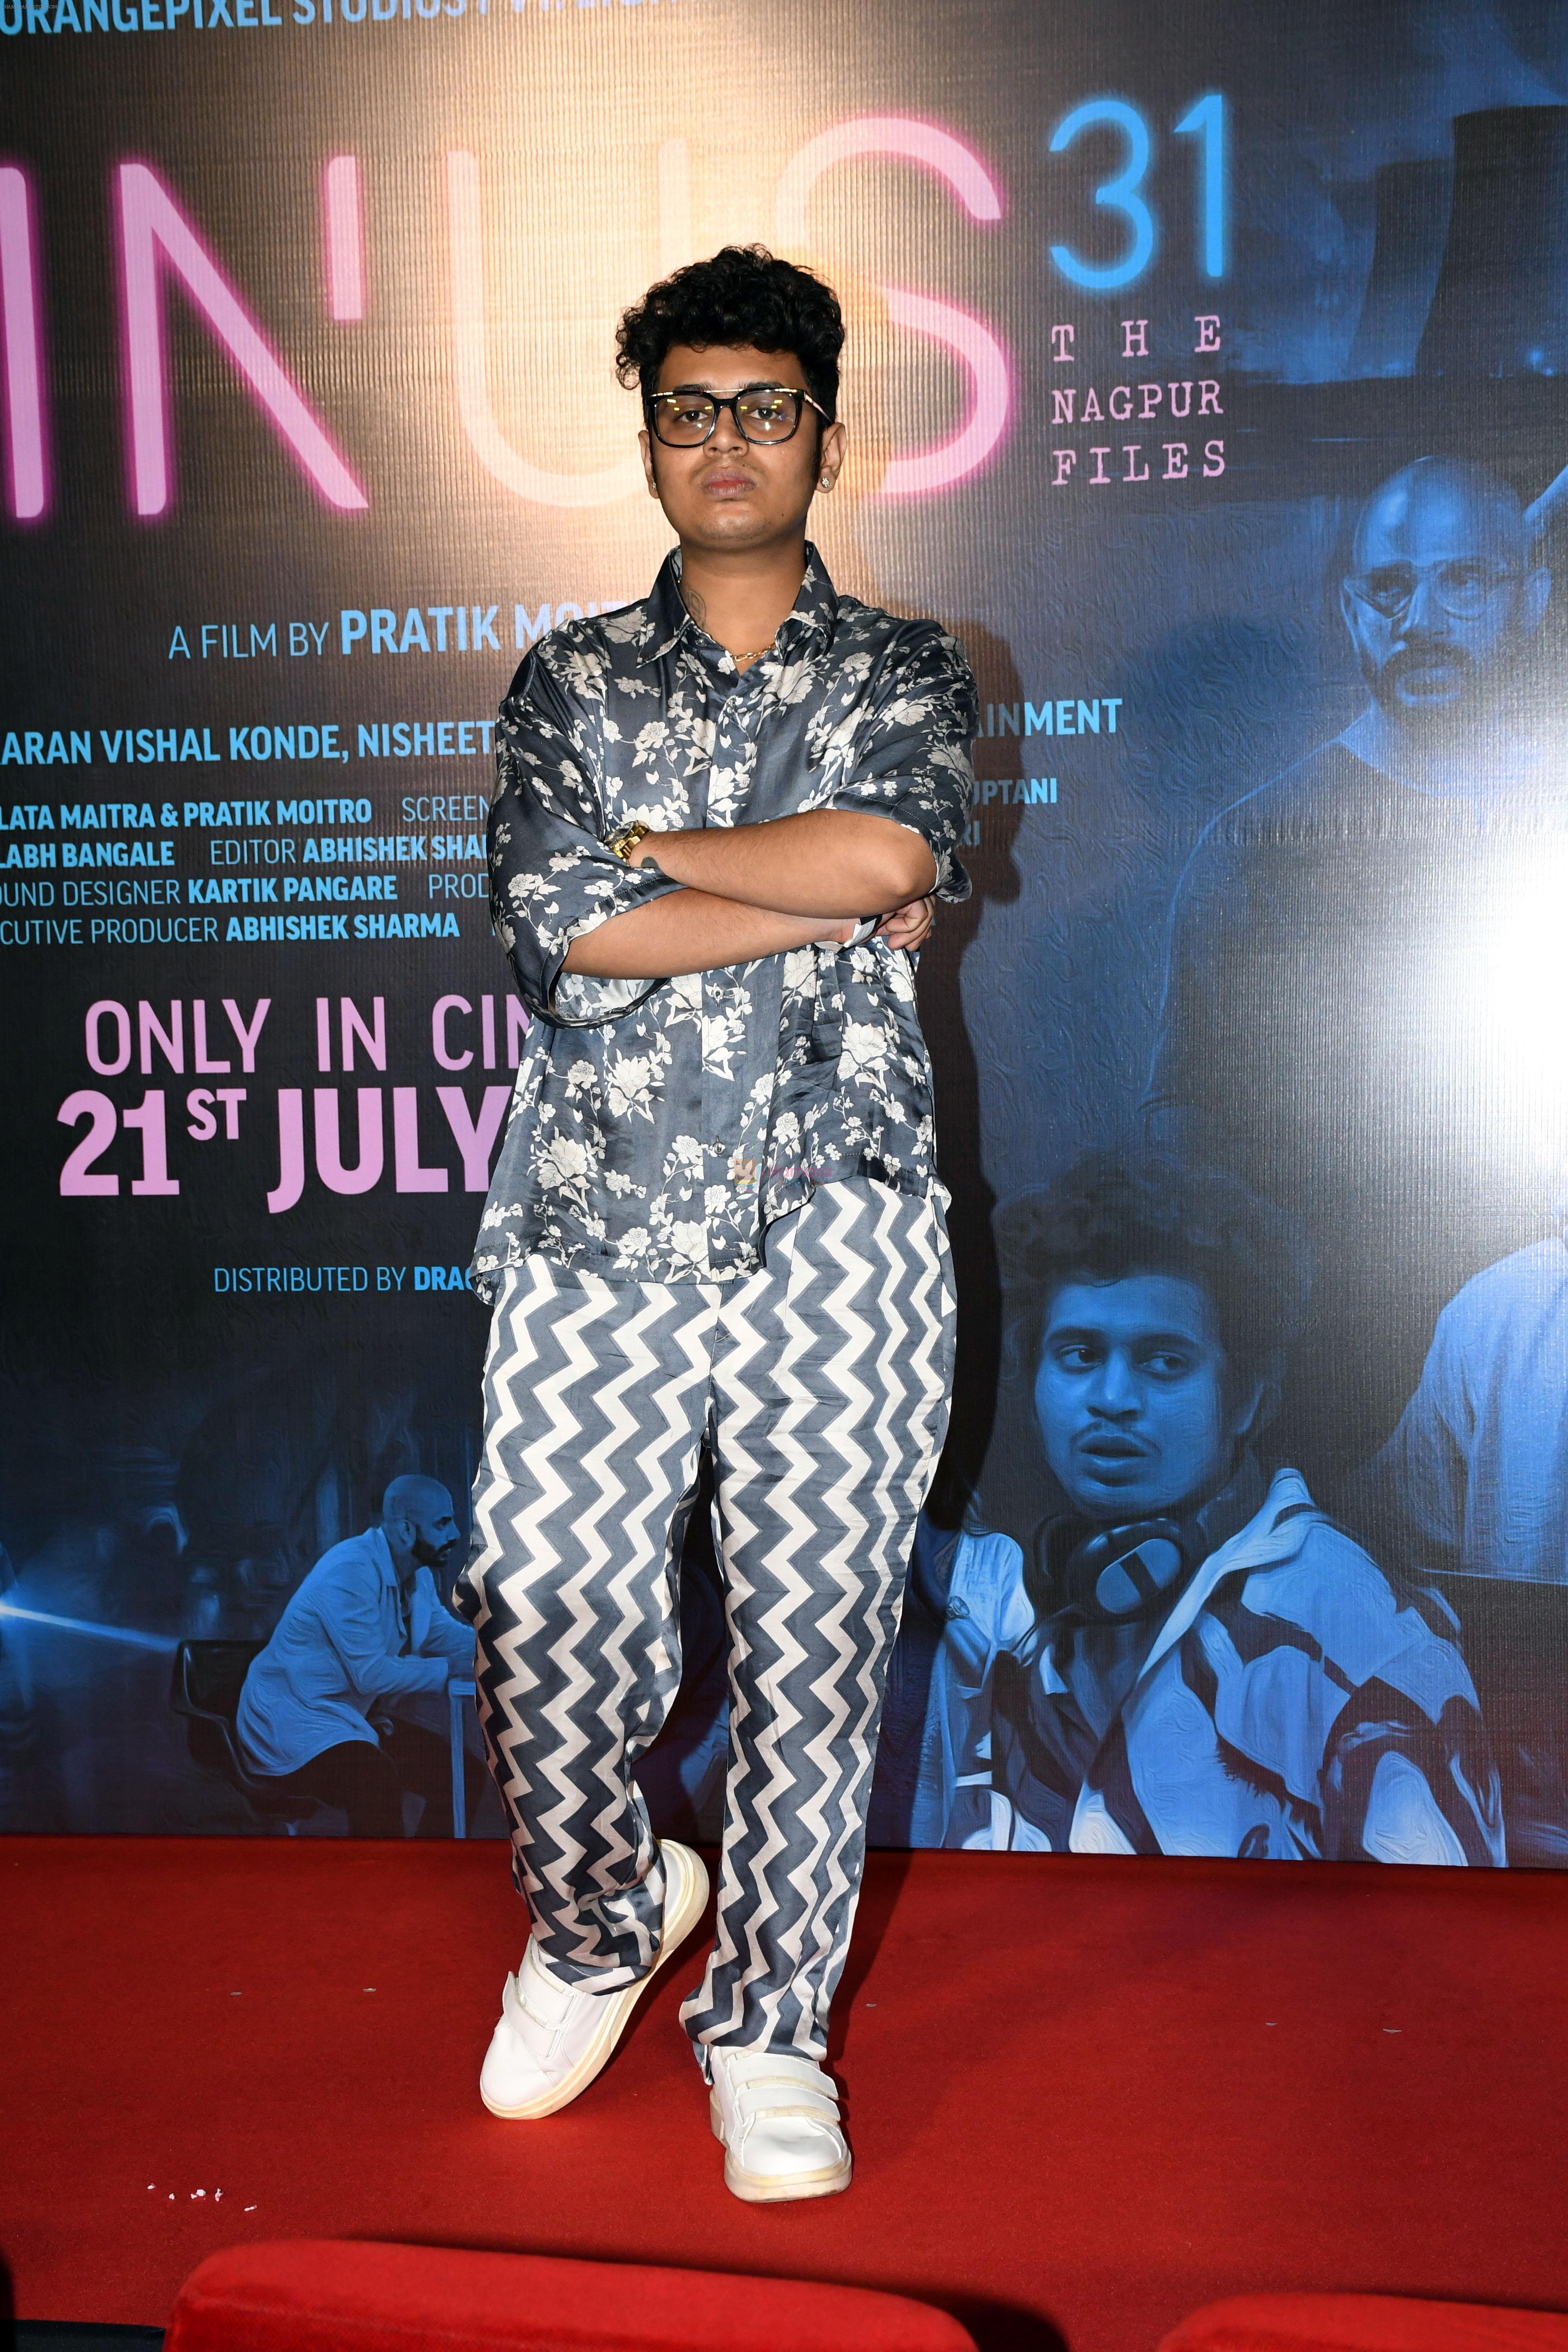 Kaam Bhaari at the trailer launch of film Minus 31 The Nagpur Files on 12 July 2023